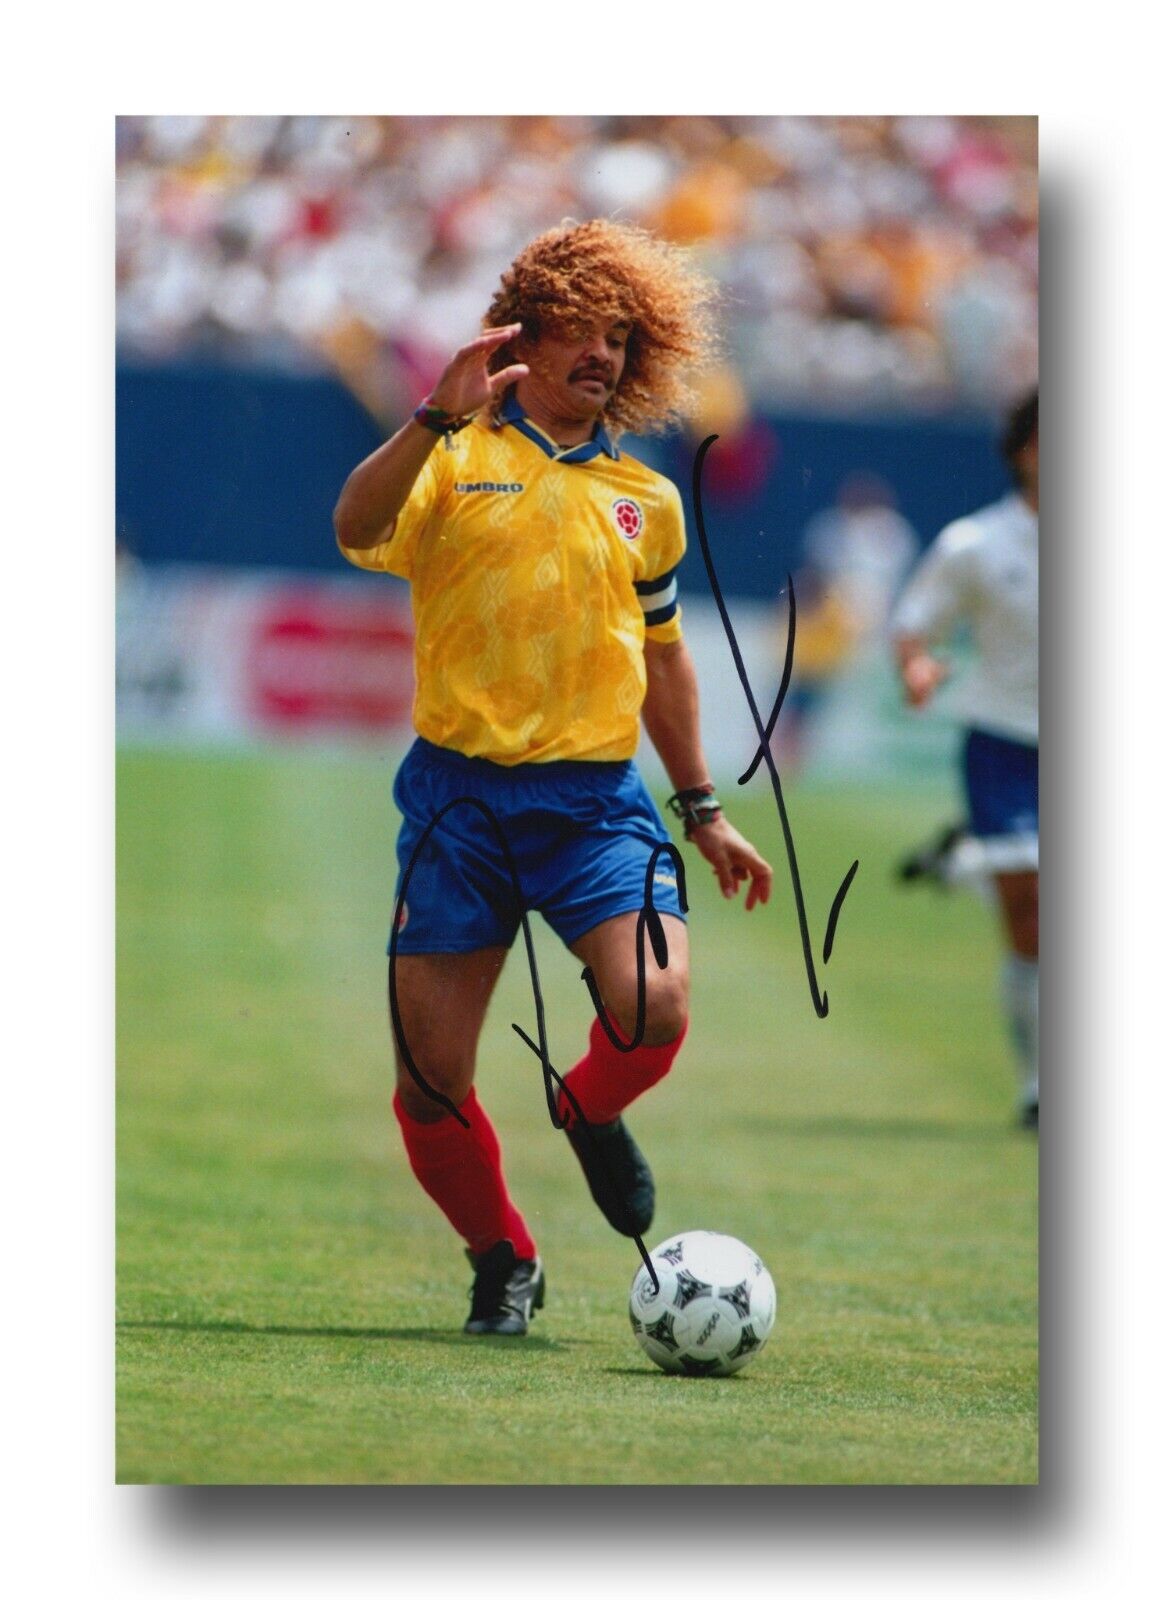 CARLOS VALDERRAMA HAND SIGNED 12x8 Photo Poster painting - COLOMBIA - FOOTBALL AUTOGRAPH 5.